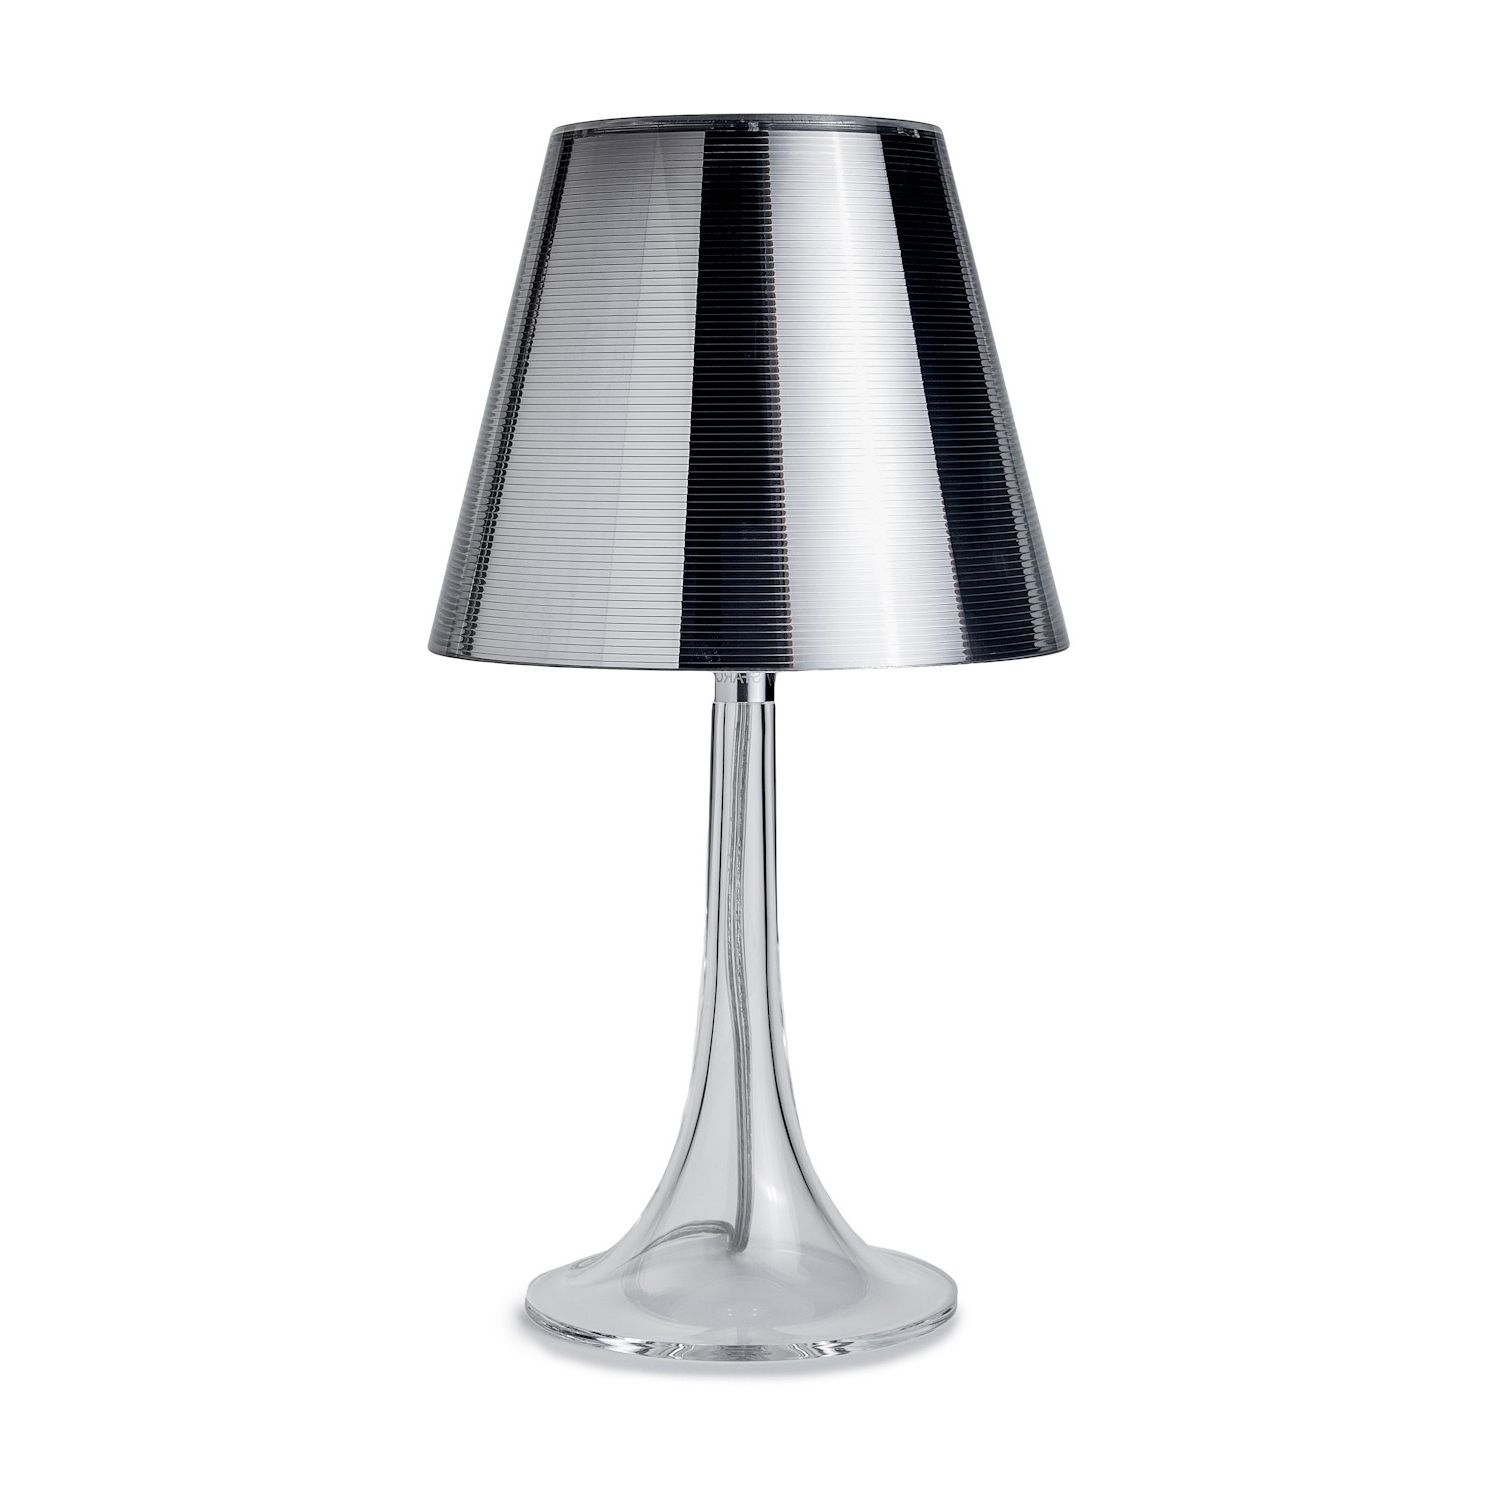 Furniture : Contemporary Desk Lamps Office Magnificent Table John For Popular John Lewis Living Room Table Lamps (View 11 of 20)